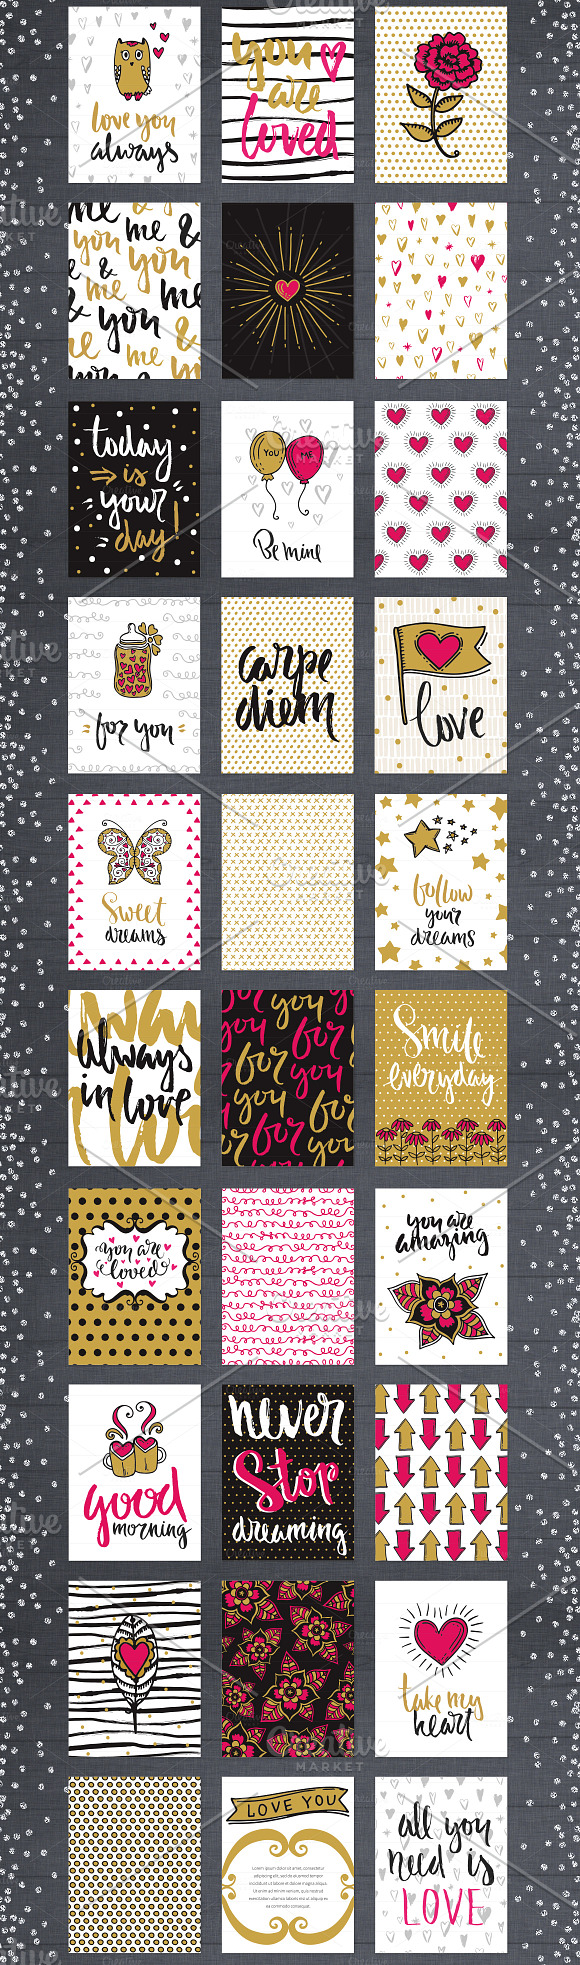 60 Valentine's Day Romantic Cards #4 in Illustrations - product preview 1